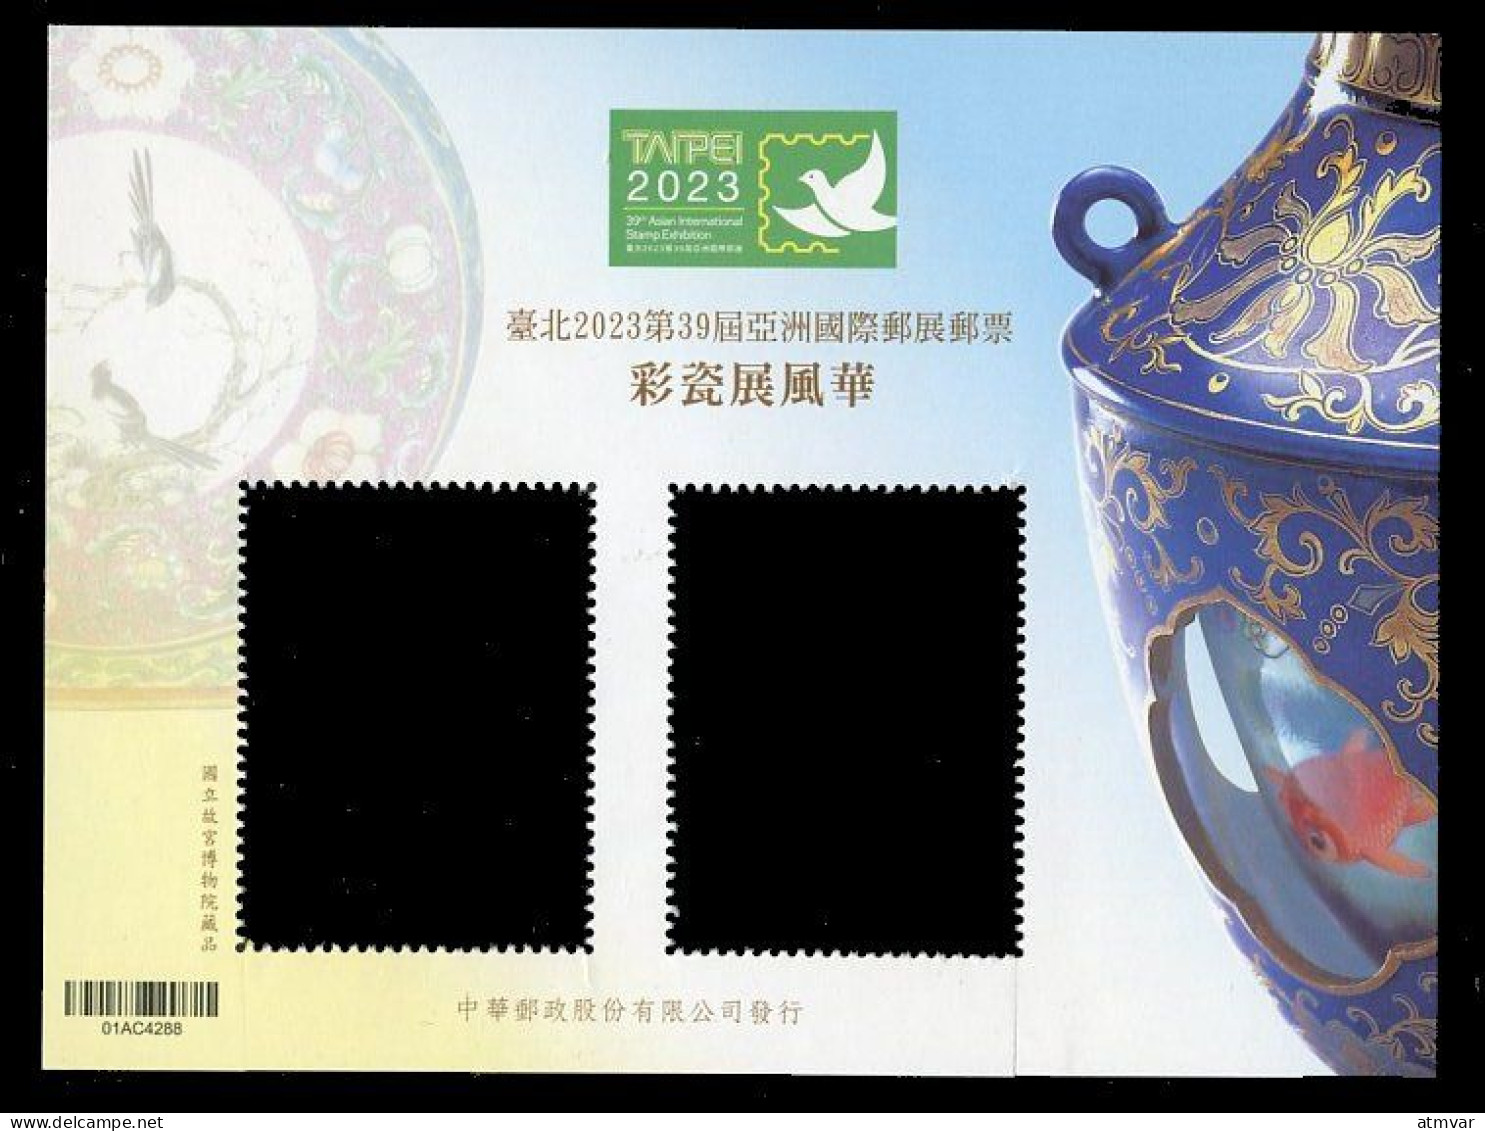 TAIWAN (2023) Cartes Maximum Cards - Taipei 2023 39th Asian Stamp Exhibition, Artistic Vases, Porcelain, Qing Dynasty - Porcelaine